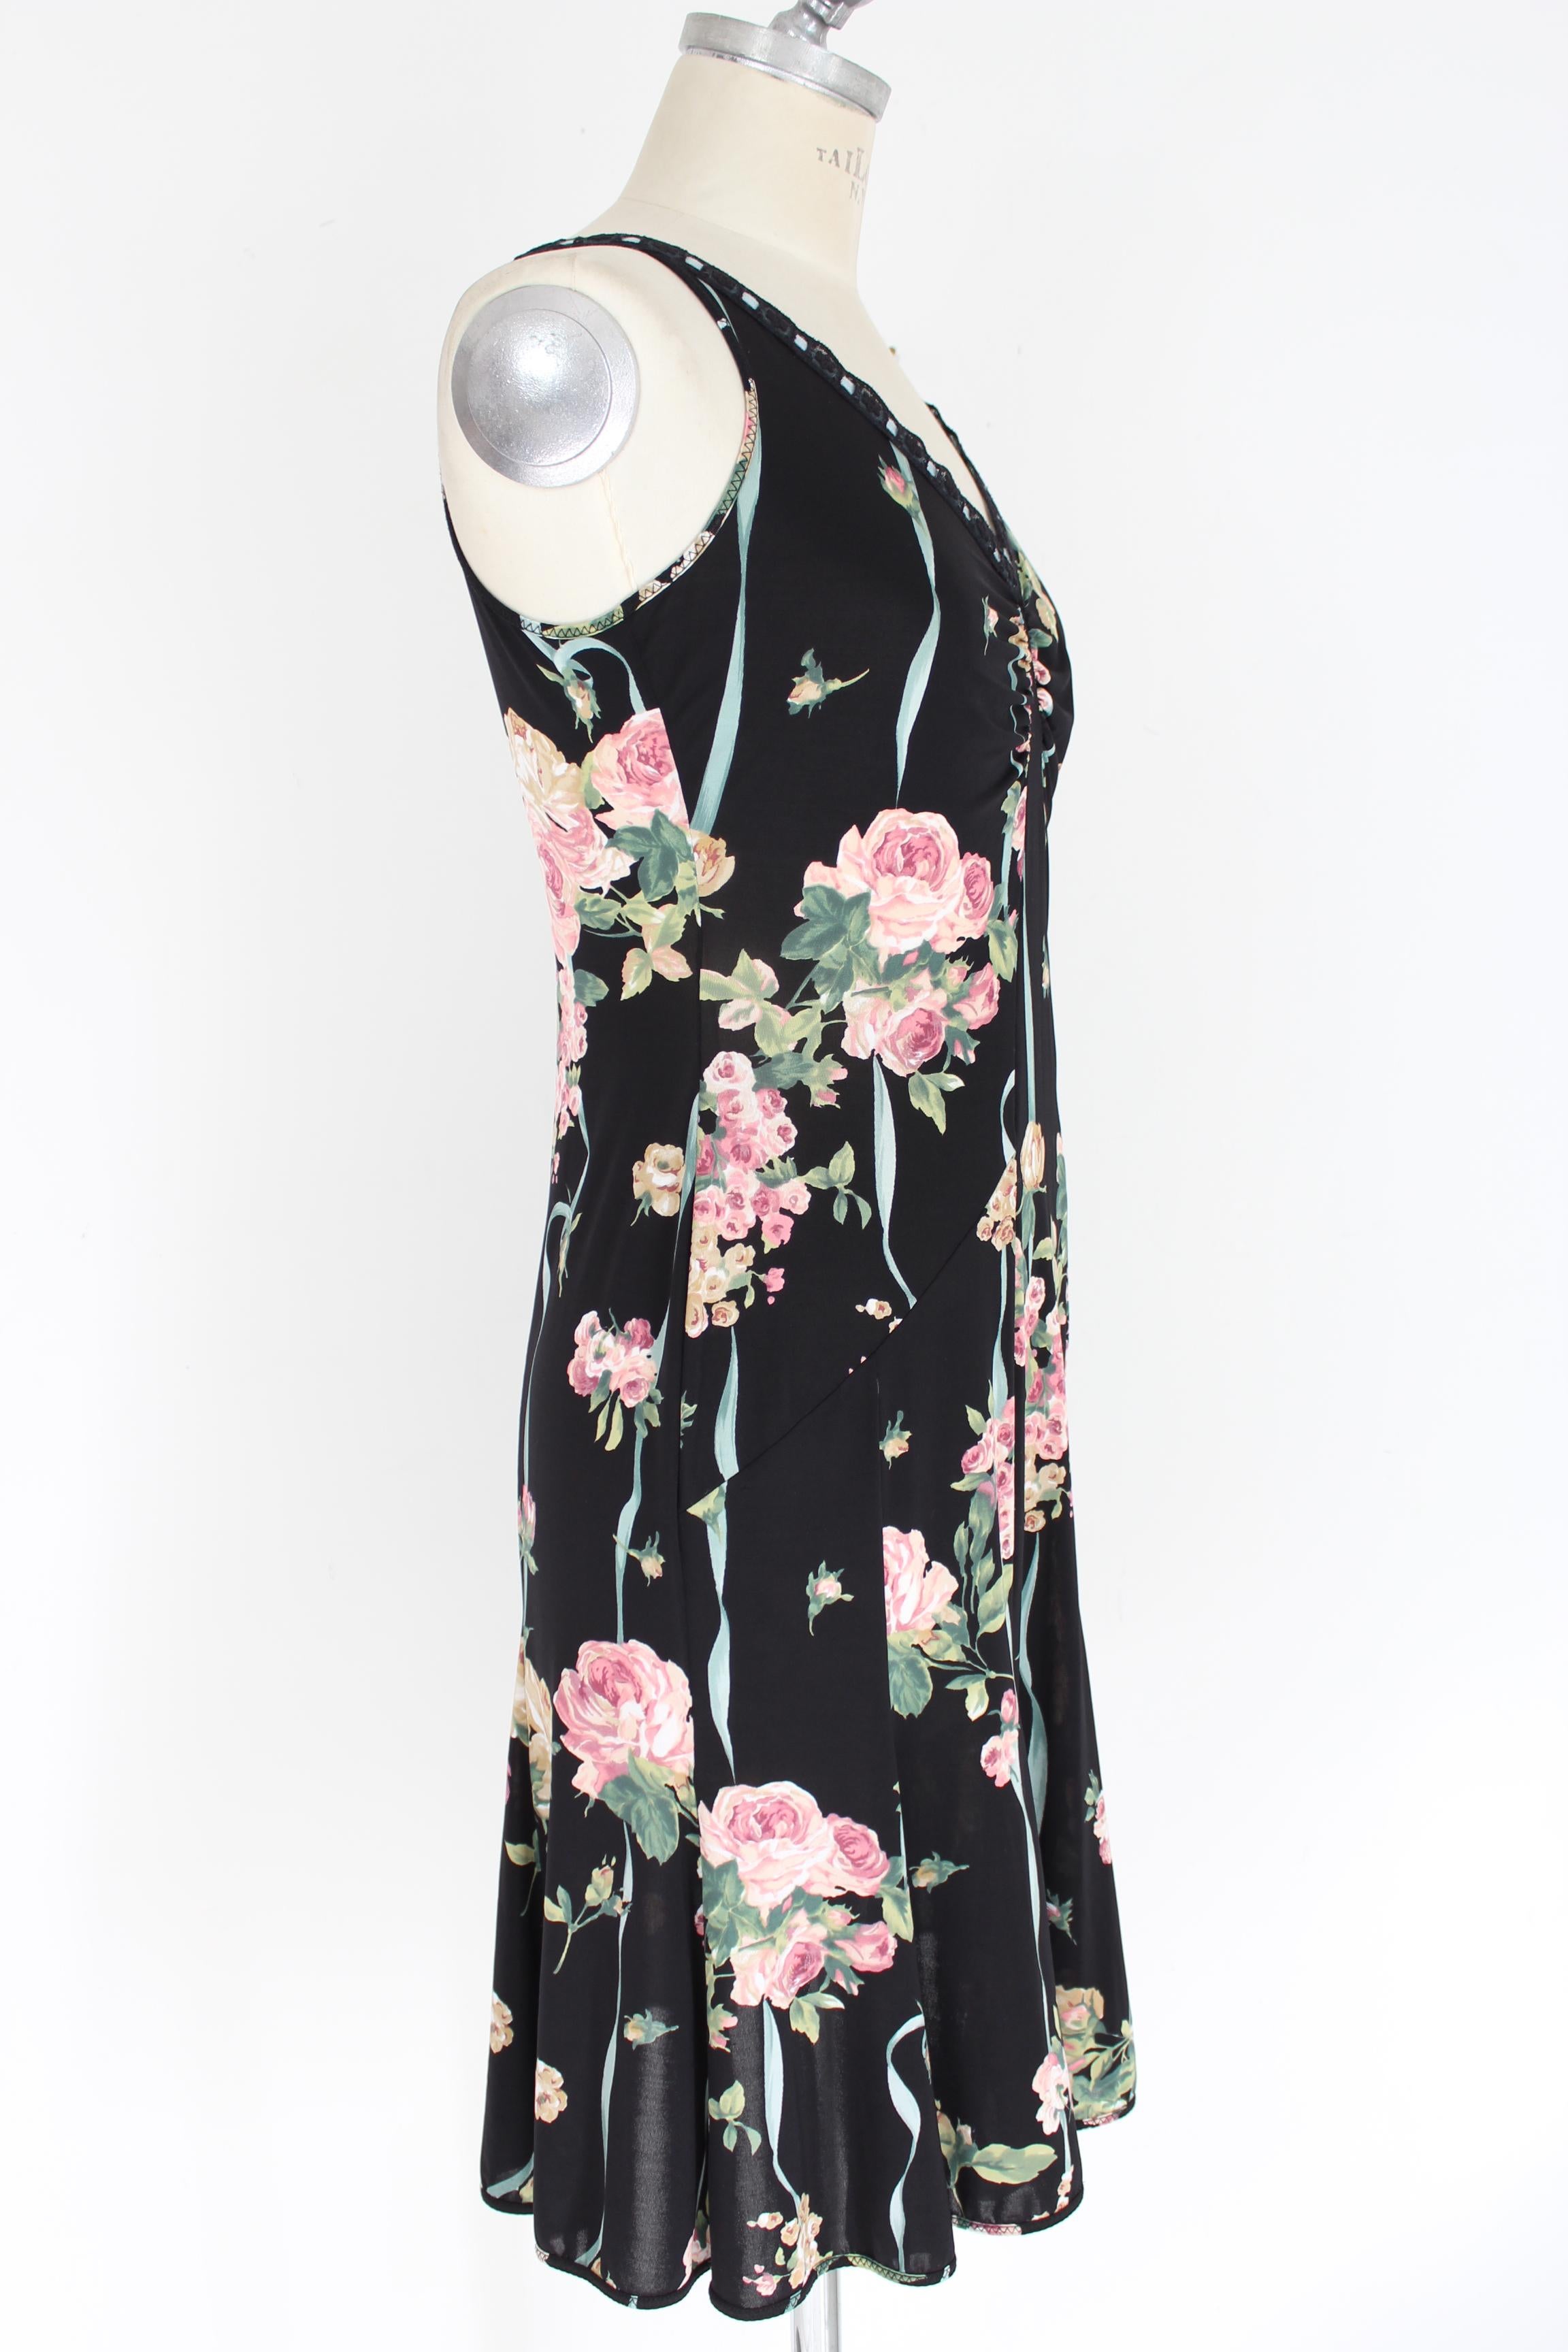 black dress with pink flowers